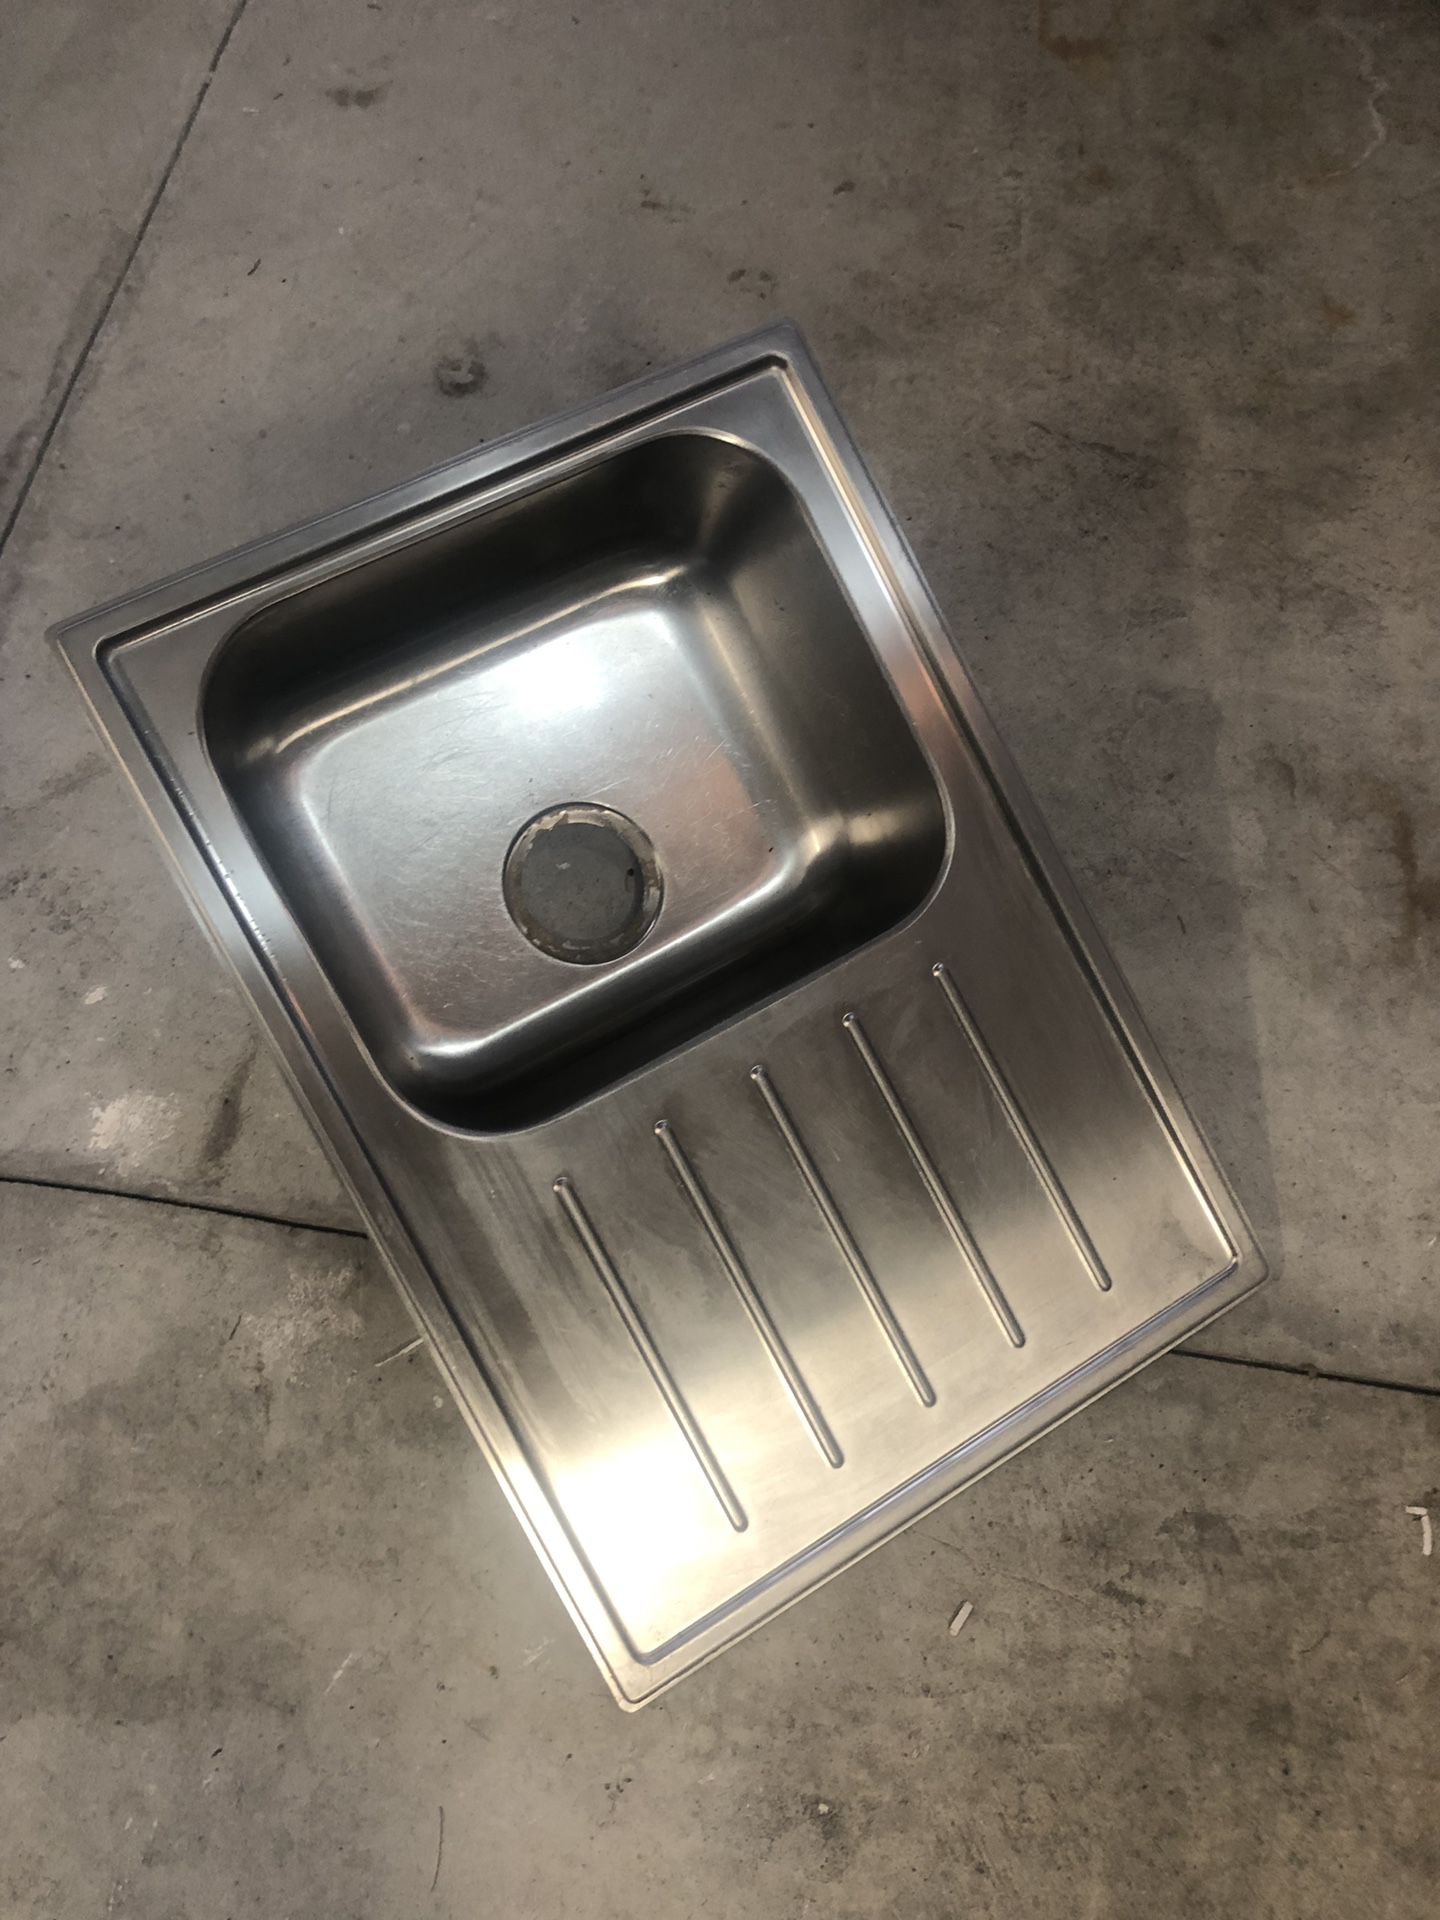 Stainless steel Kitchen sink 26.5” by 19.3/4” with the dish drain attached